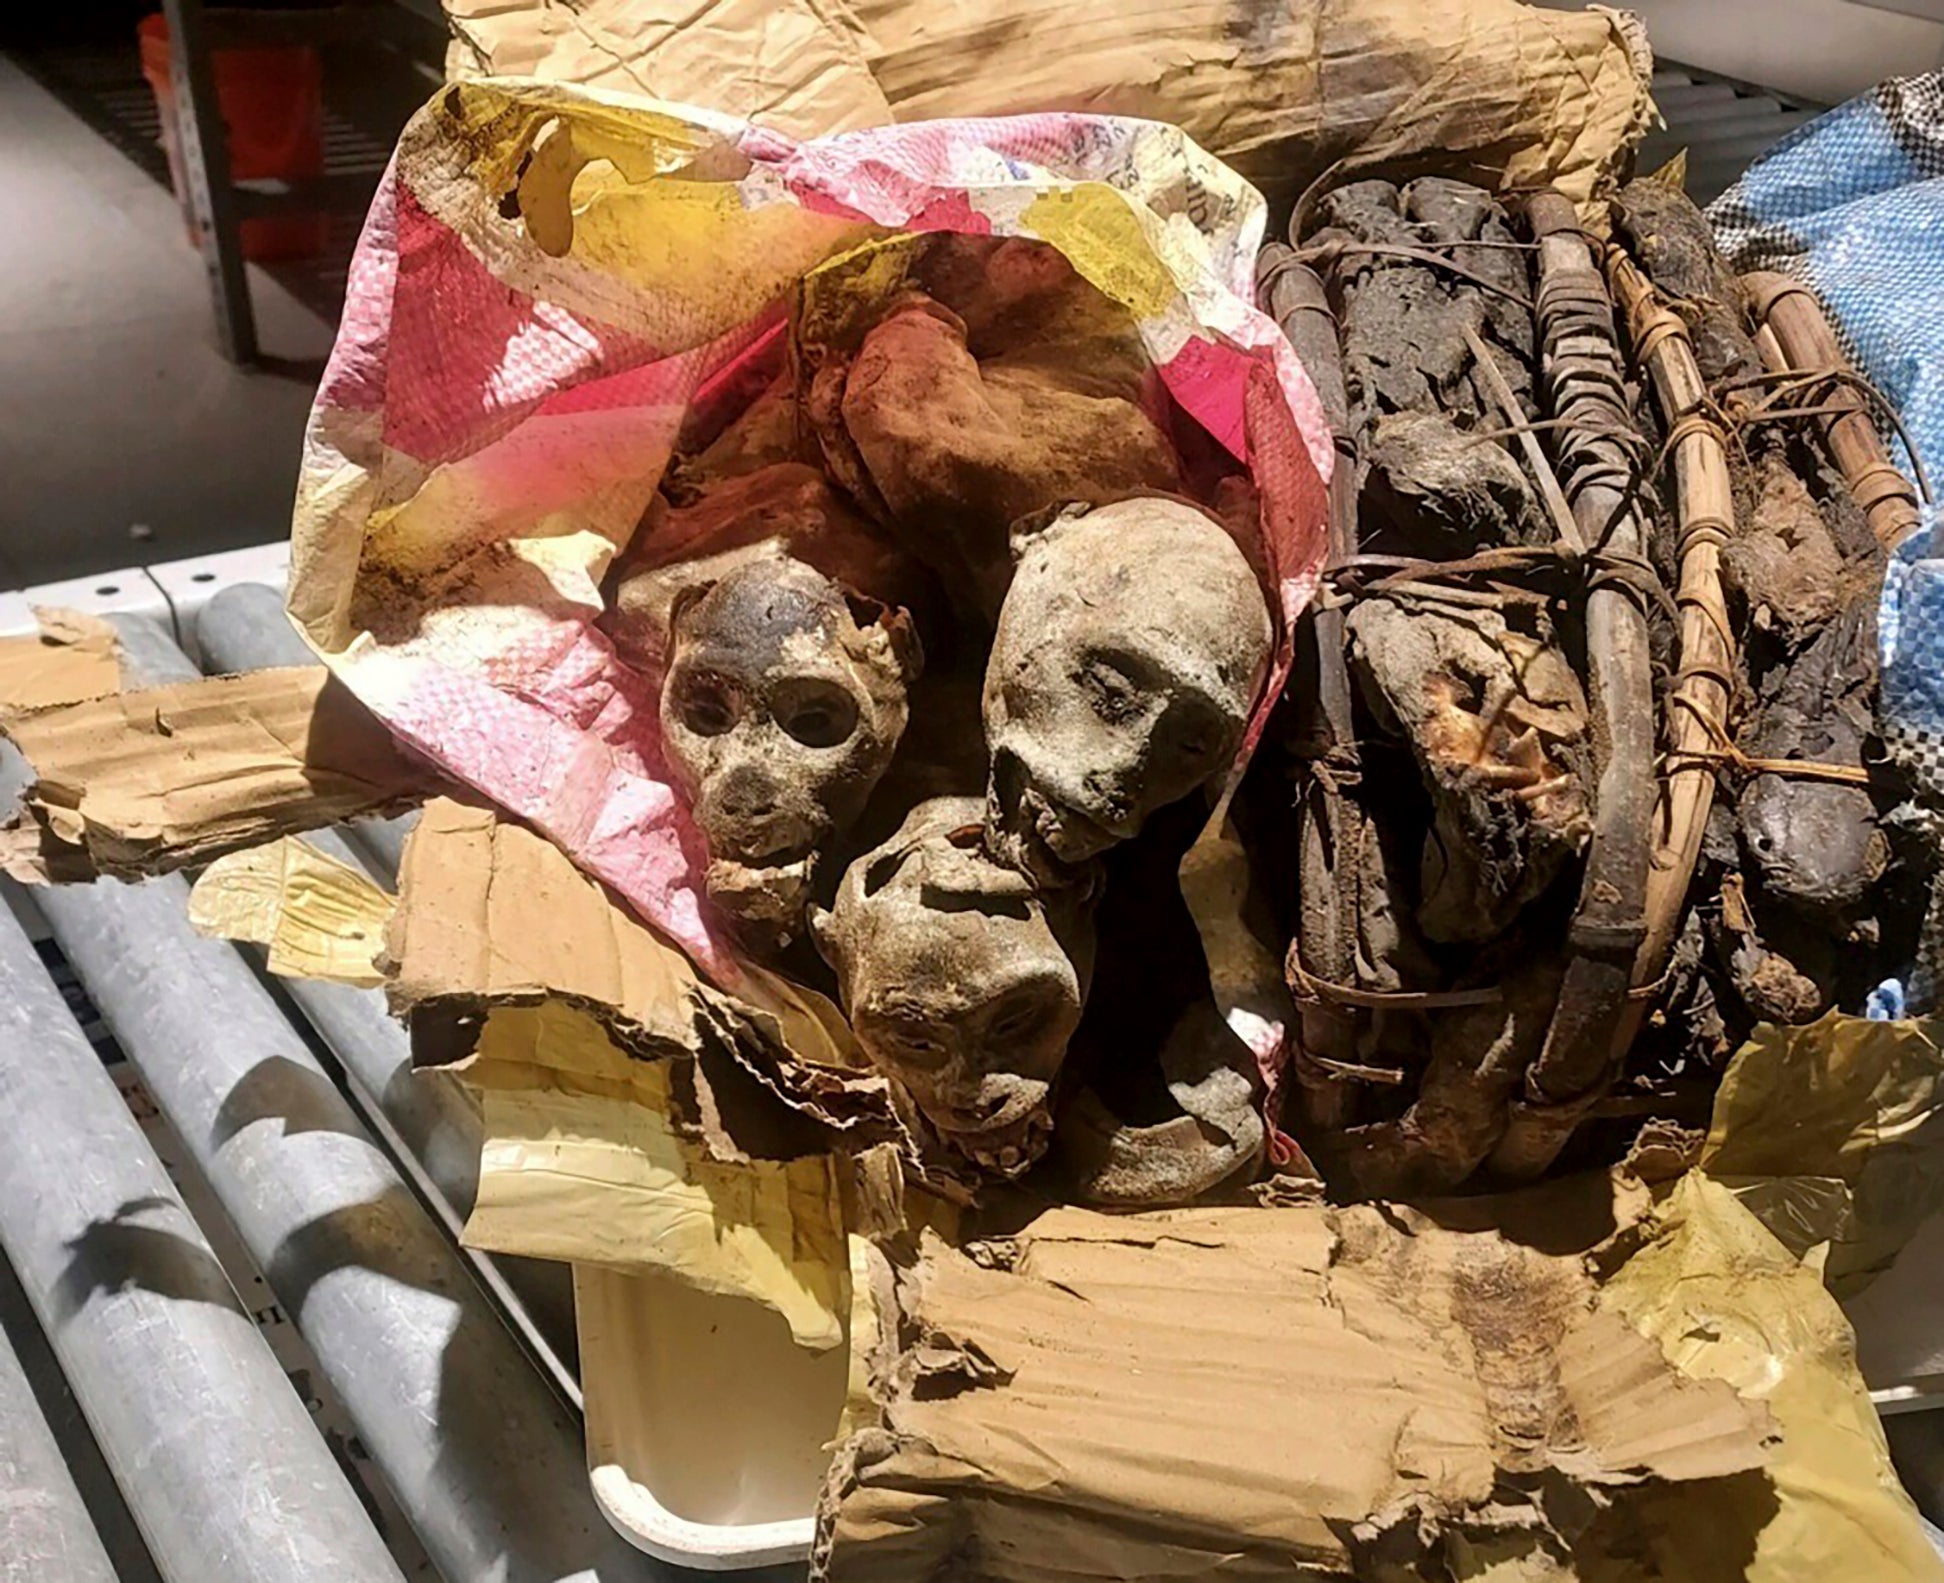 <p>The mummified remains of four monkeys discovered and seized from luggage from a traveller who’d been to the Democratic Republic of Congo before arriving at Boston</p>